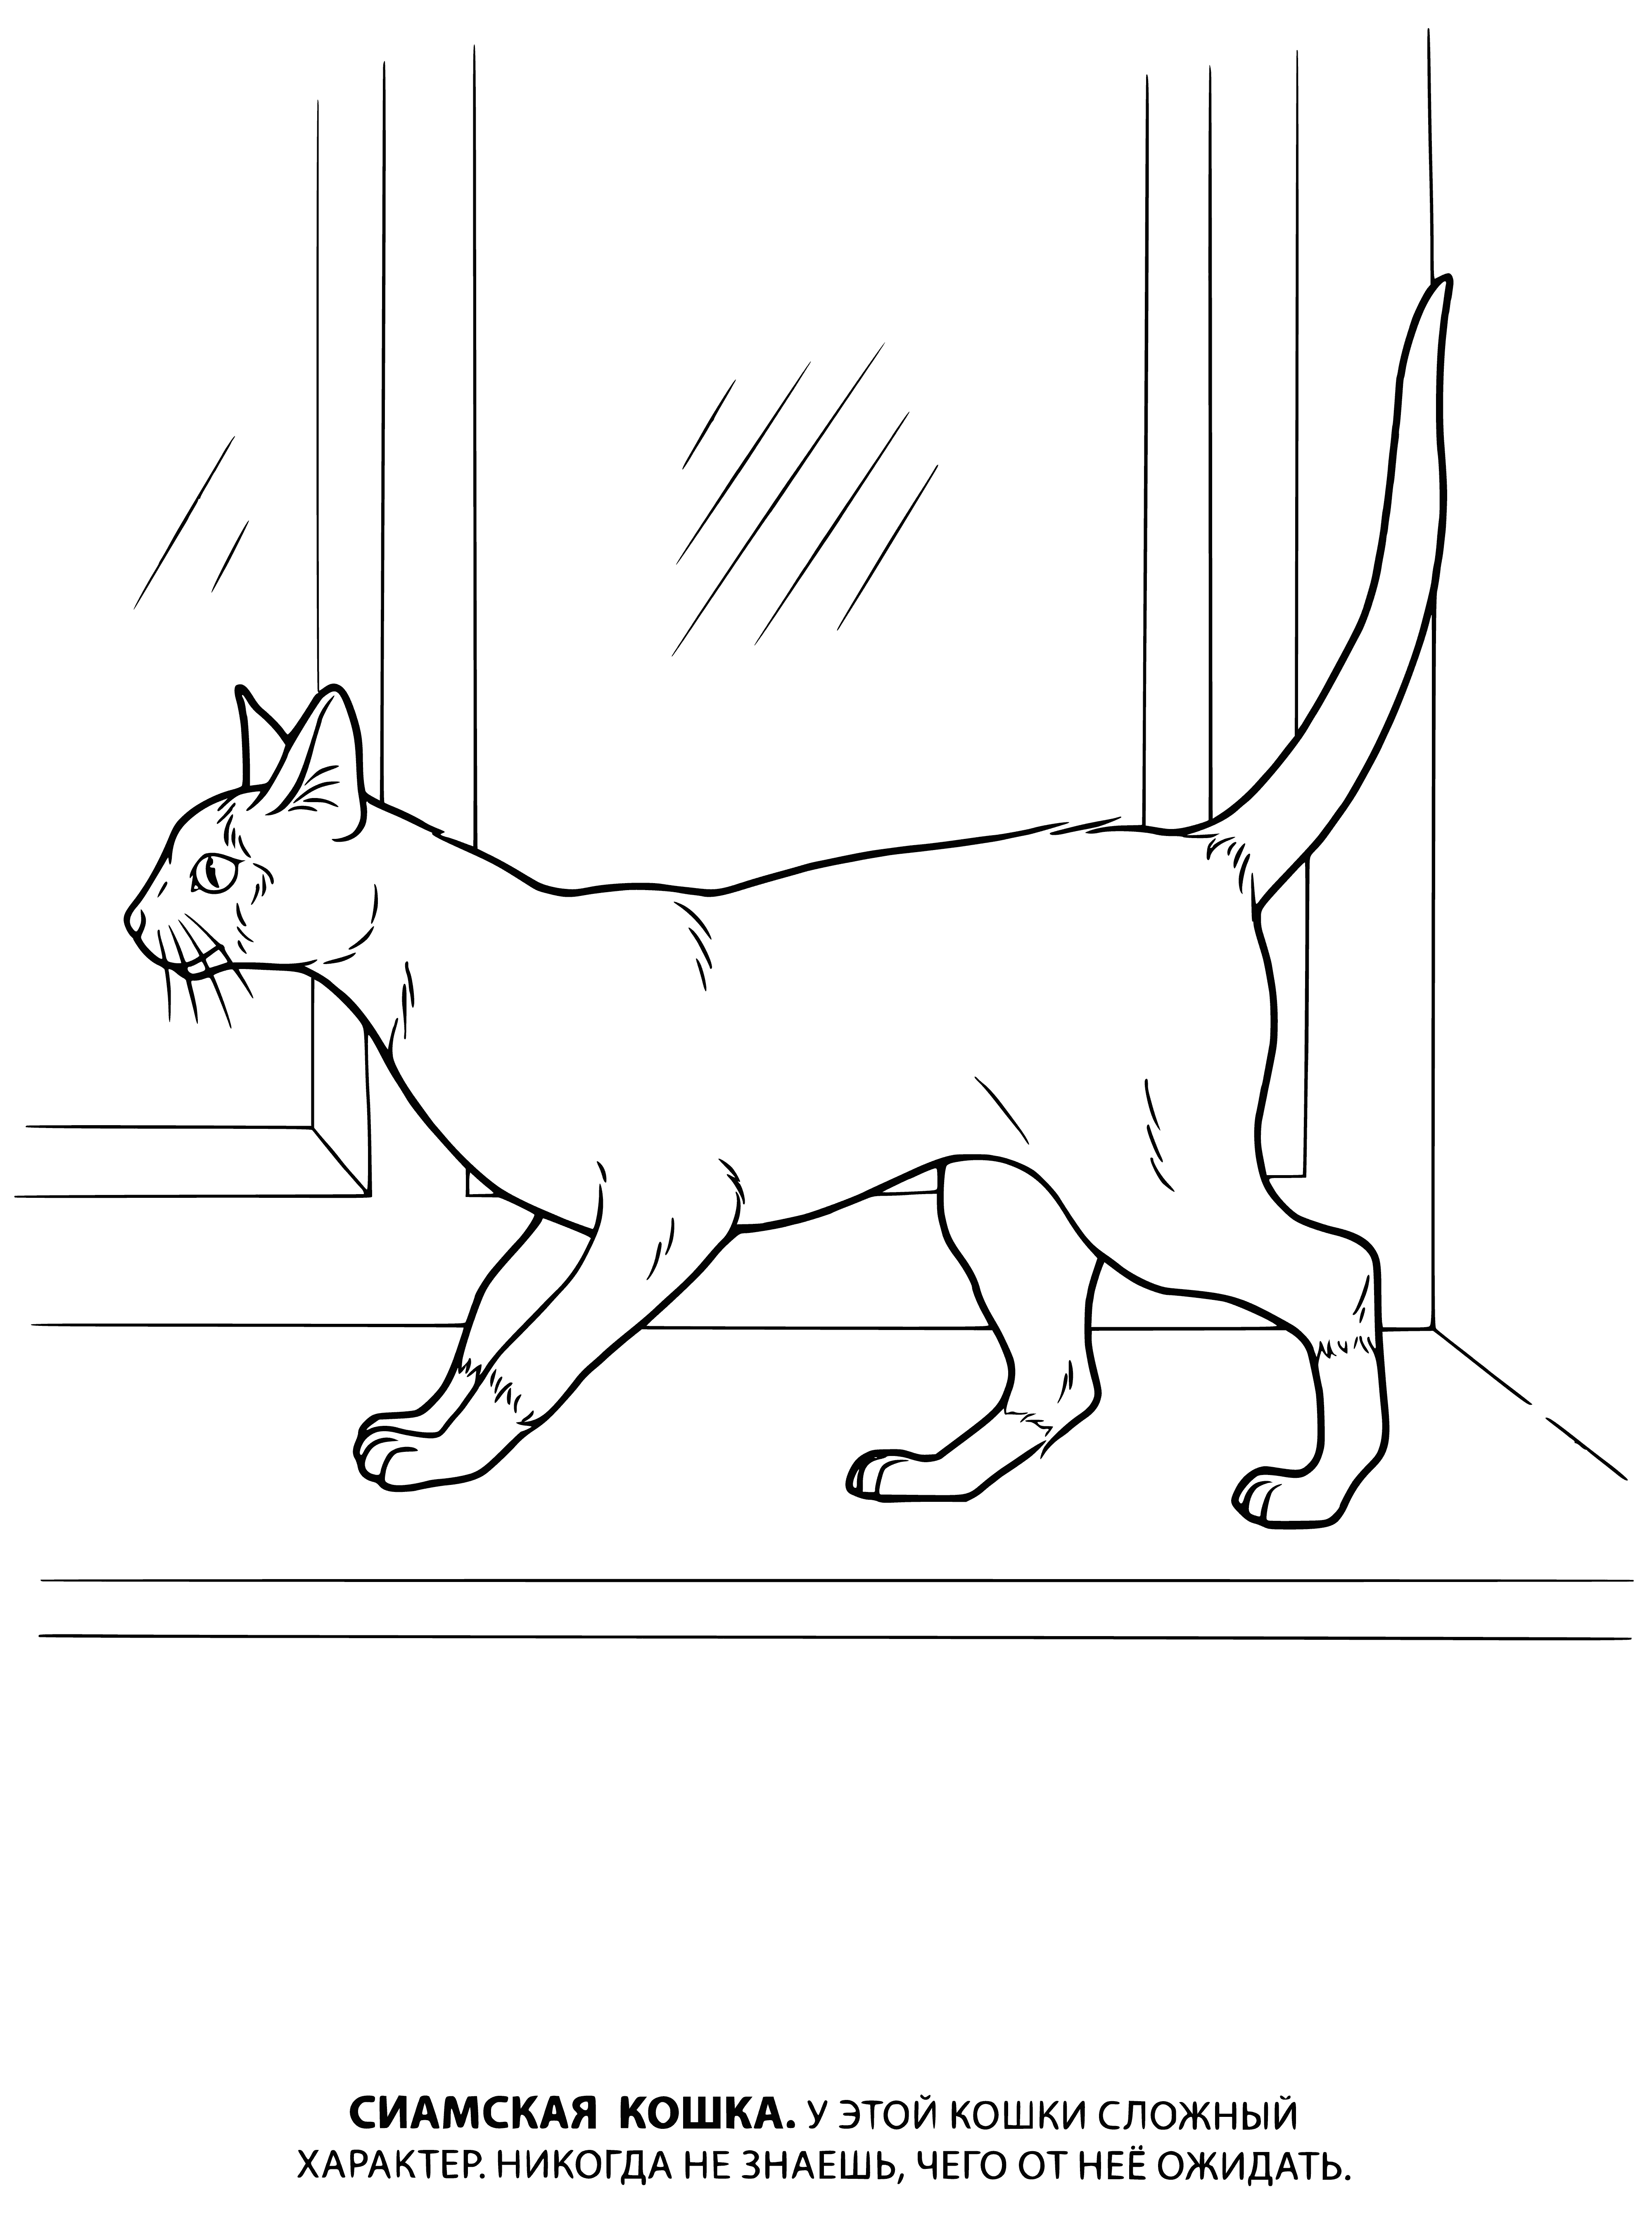 Siamese cat coloring page